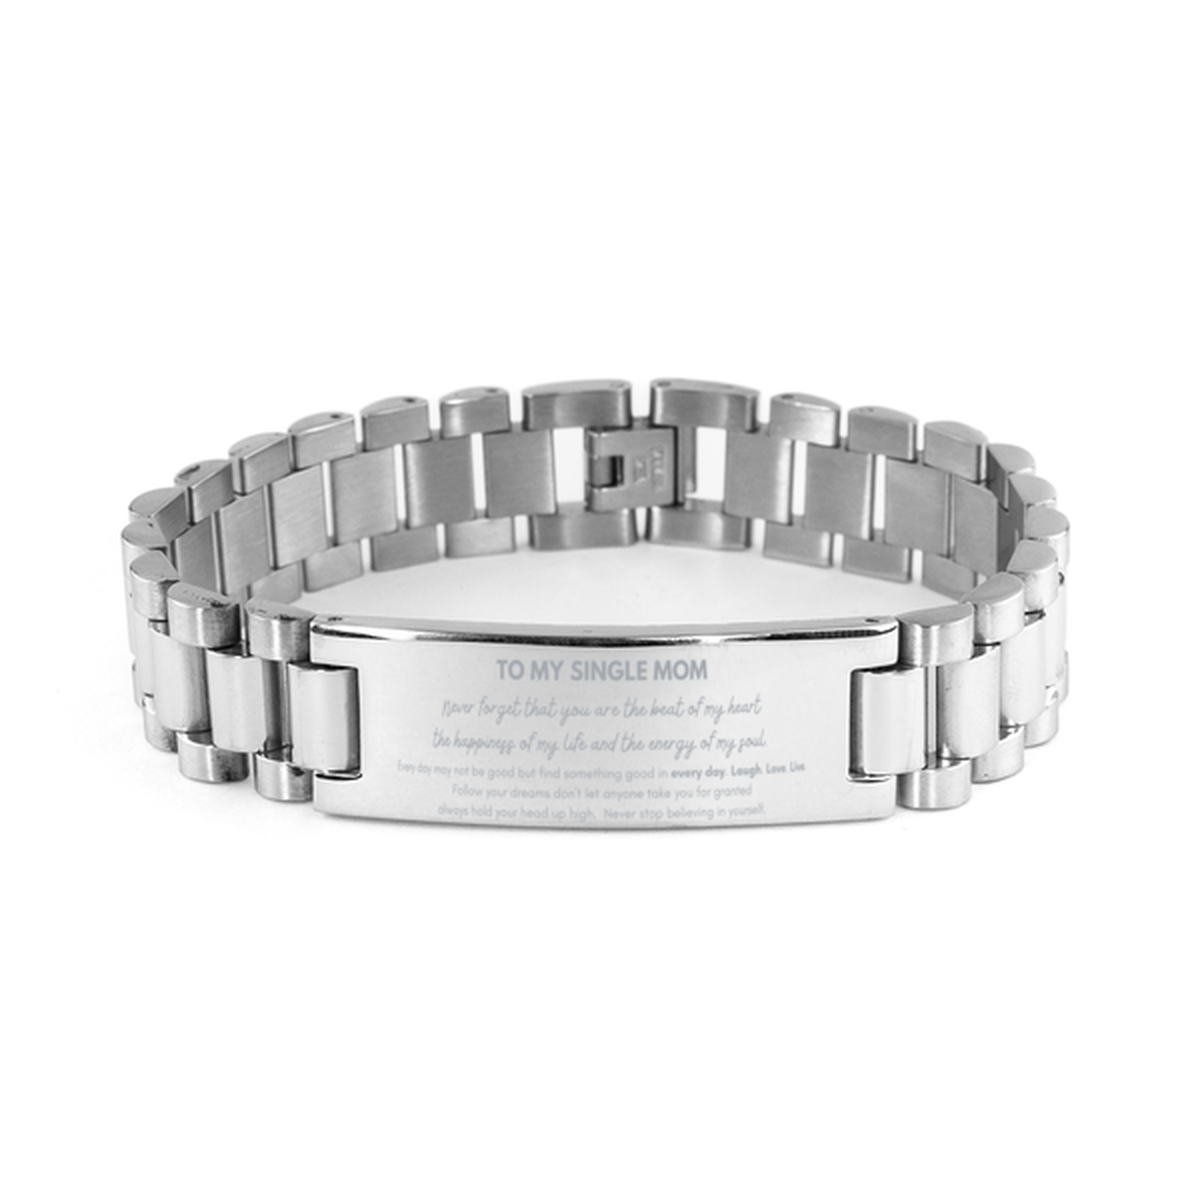 To My Single Mom Bracelet Gifts, Christmas Single Mom Ladder Stainless Steel Bracelet Present, Birthday Unique Motivational For Single Mom, To My Single Mom Never forget that you are the beat of my heart the happiness of my life and the energy of my soul